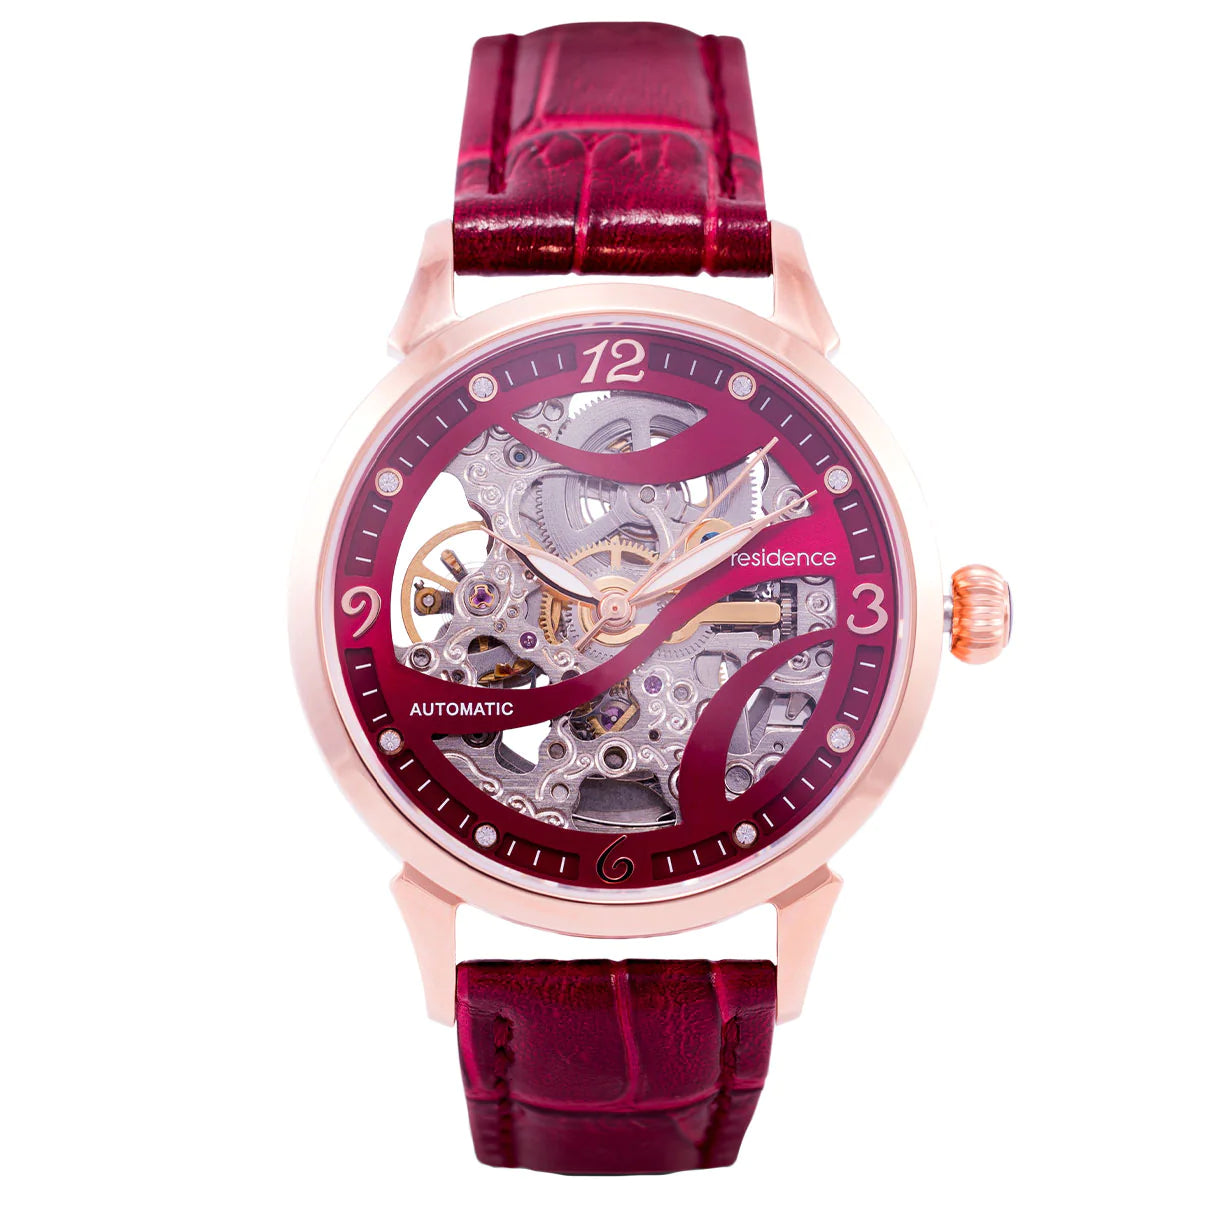 Residence Watches Farbe Uhr Stahl Gold/ Bordeaux Rot 35mm Damenuhr